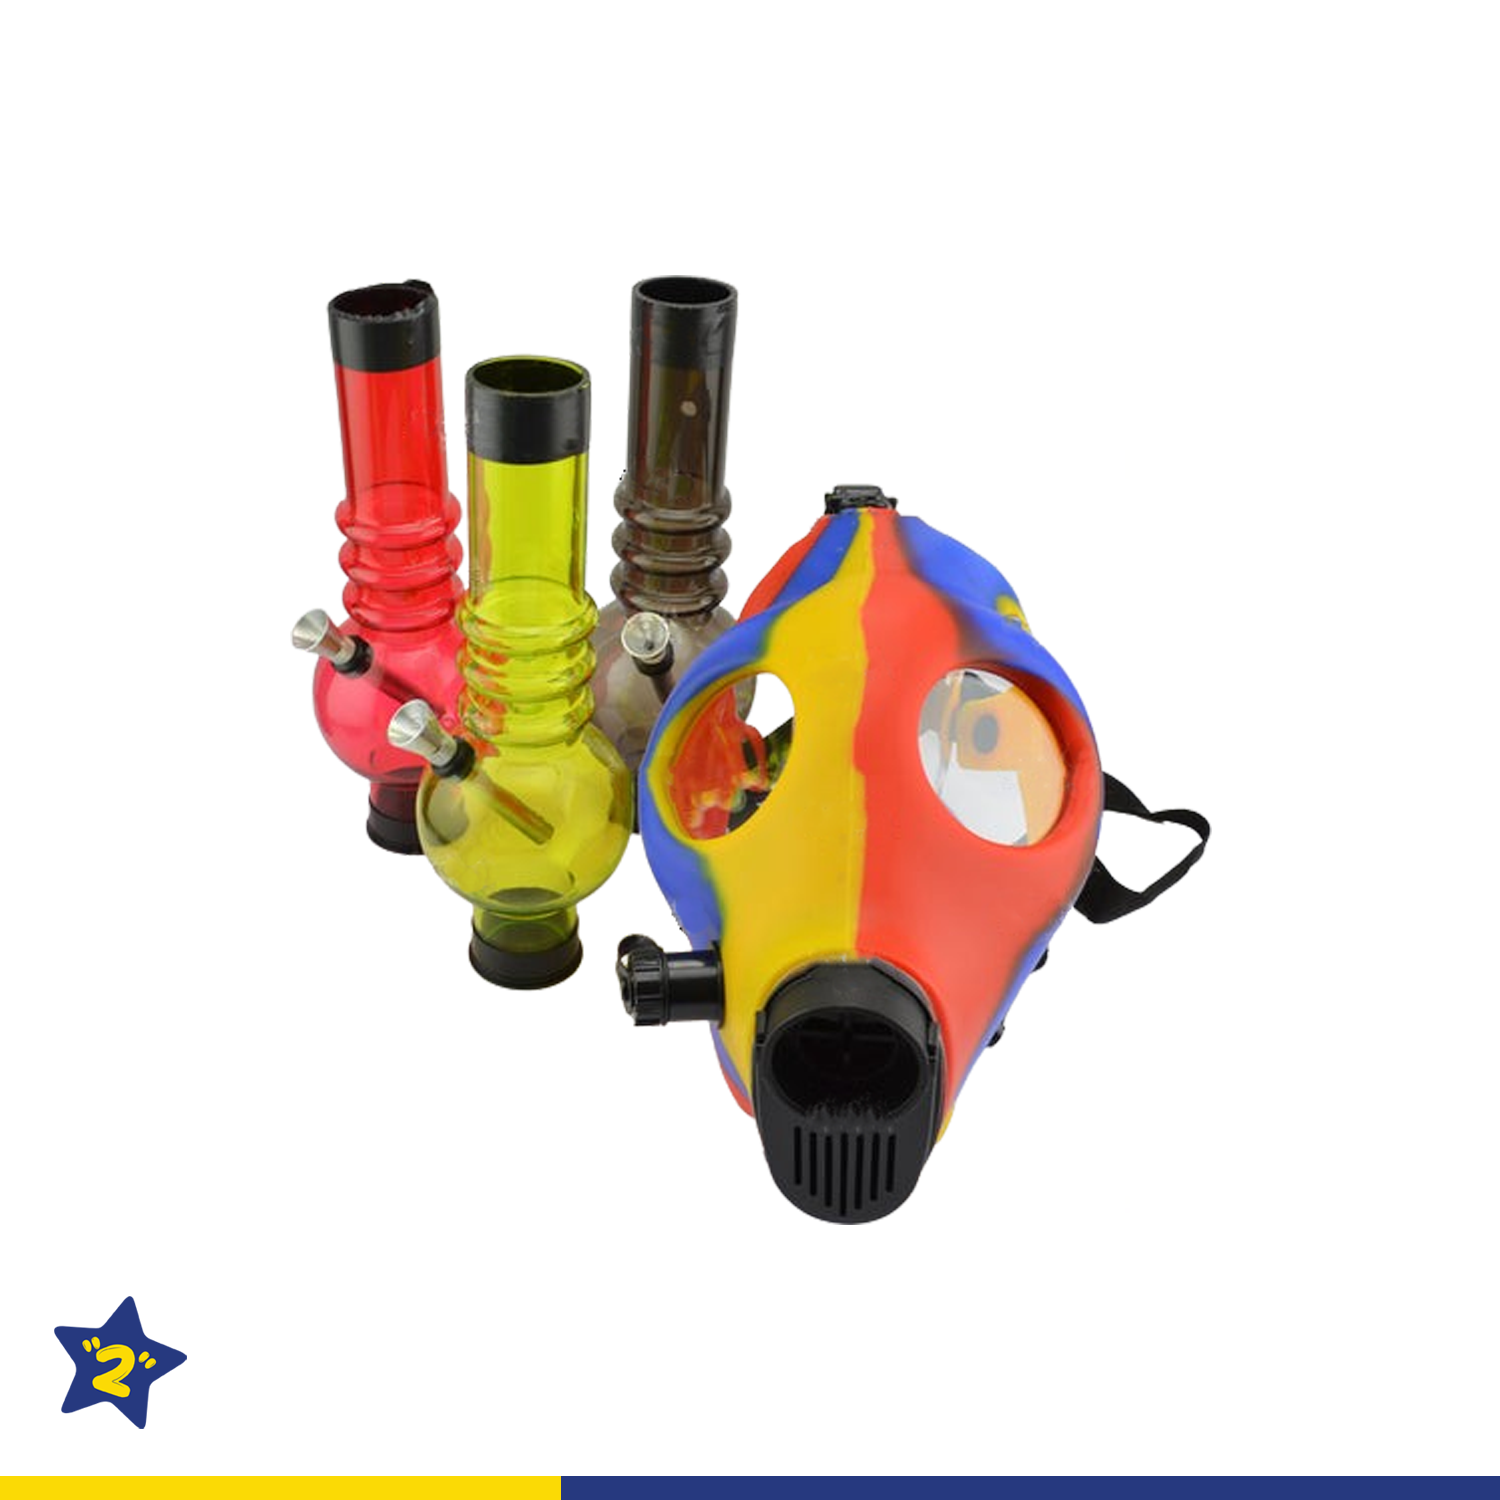 Blue, Red & Yellow Gas Mask With Acrylic Tube